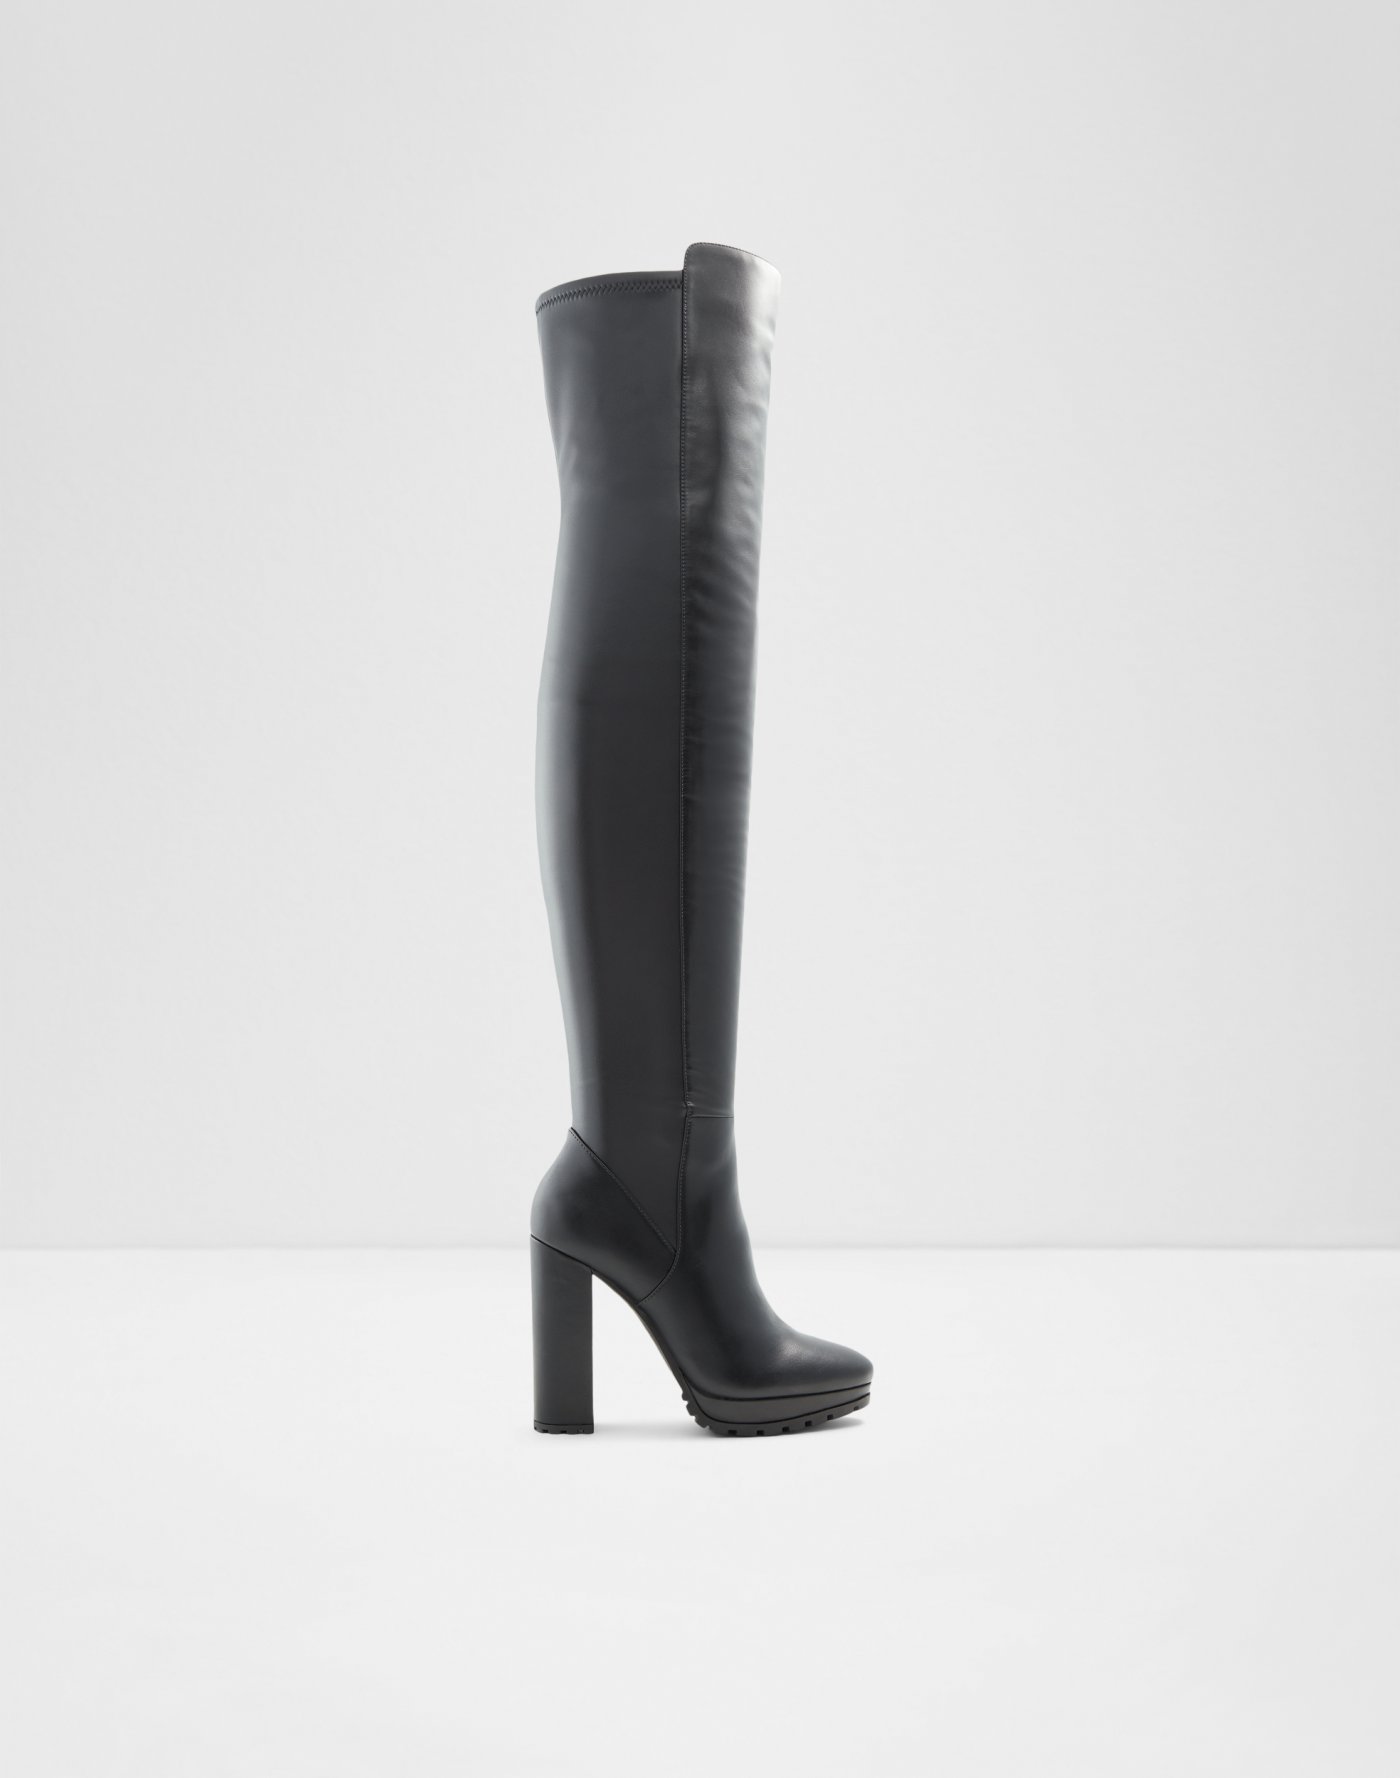 Over-The-Knee Boots \u0026 Thigh High Boots 